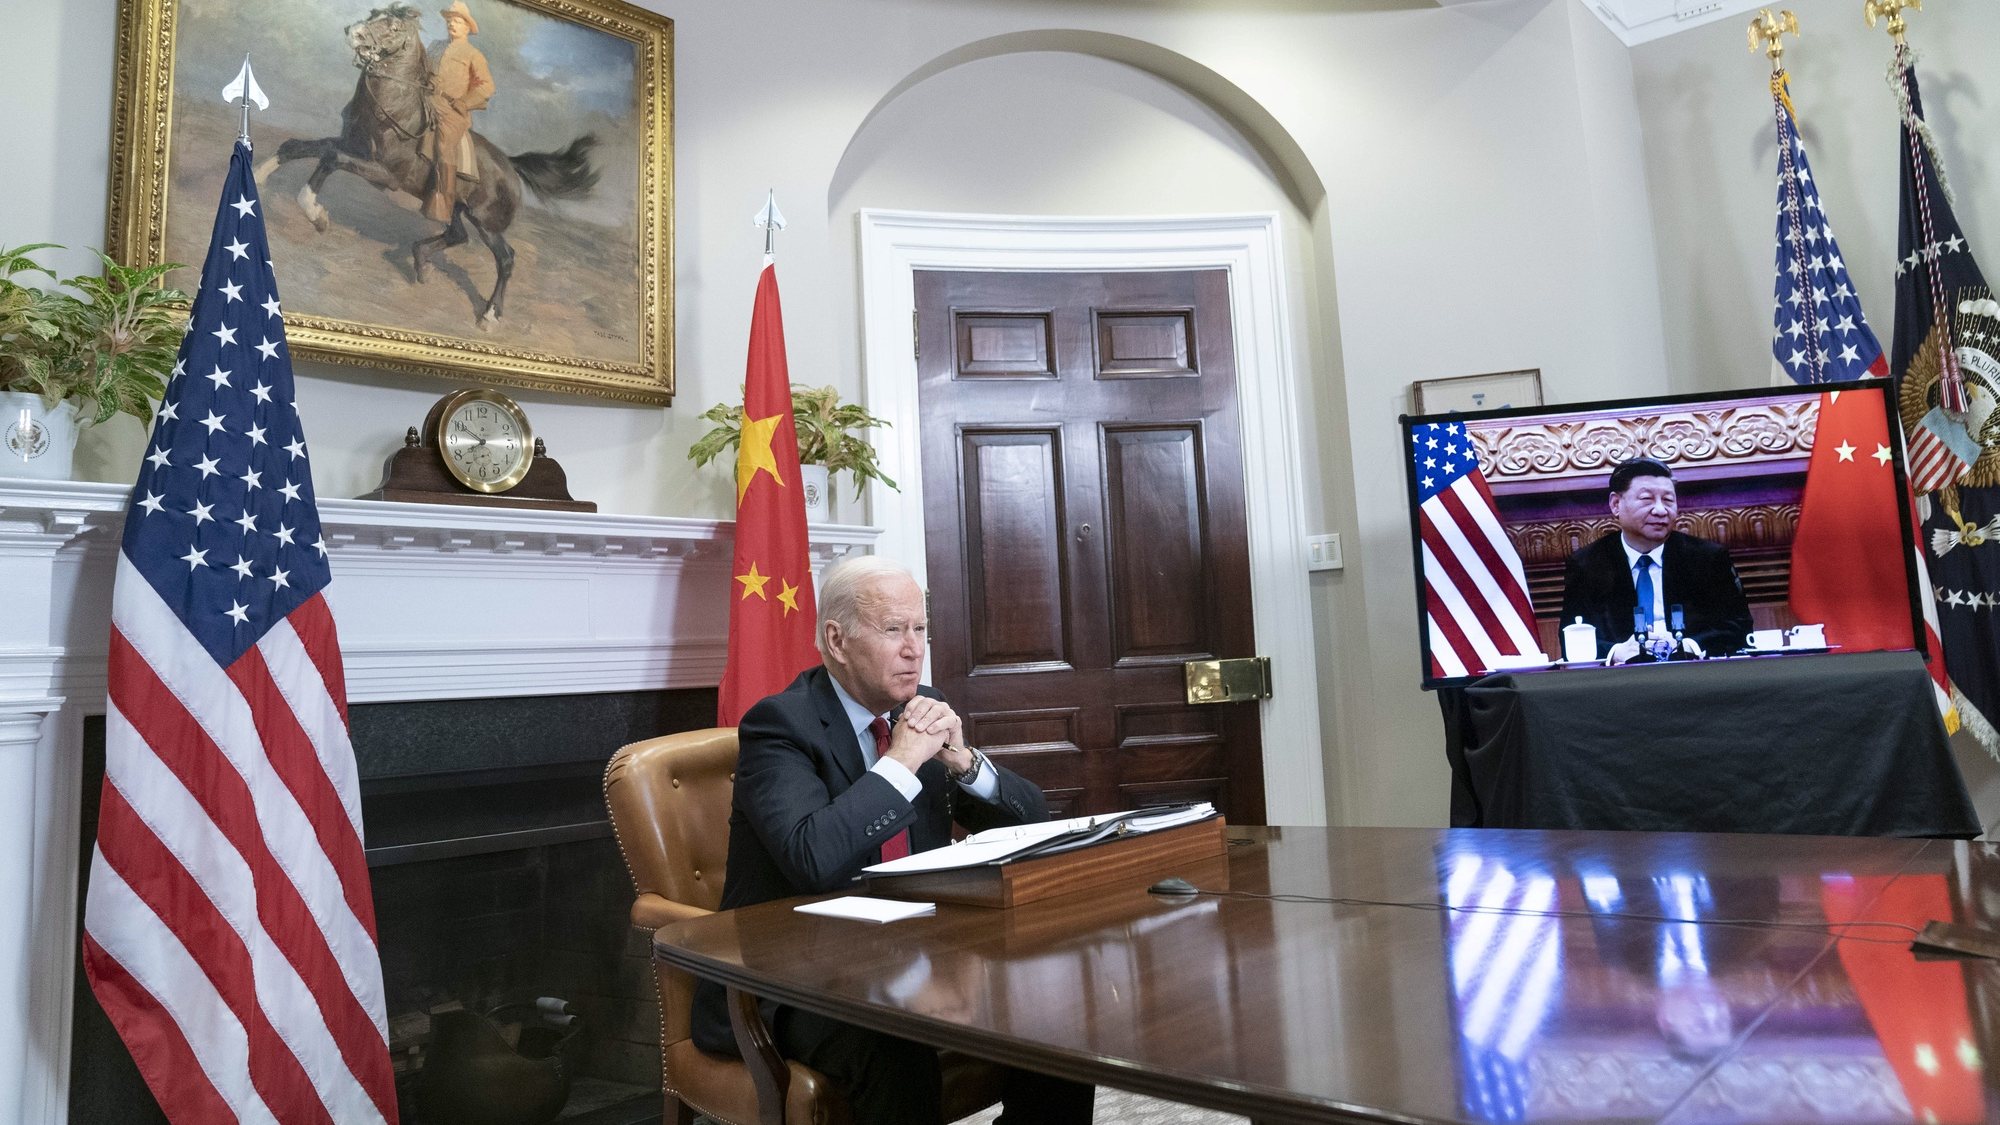 epa09584543 US President Joe Biden listens during a virtual summit with Chinese President Xi Jinping in the Roosevelt Room of the White House in Washington DC, USA, 15 November 2021.  EPA/SARAH SILBIGER / POOL